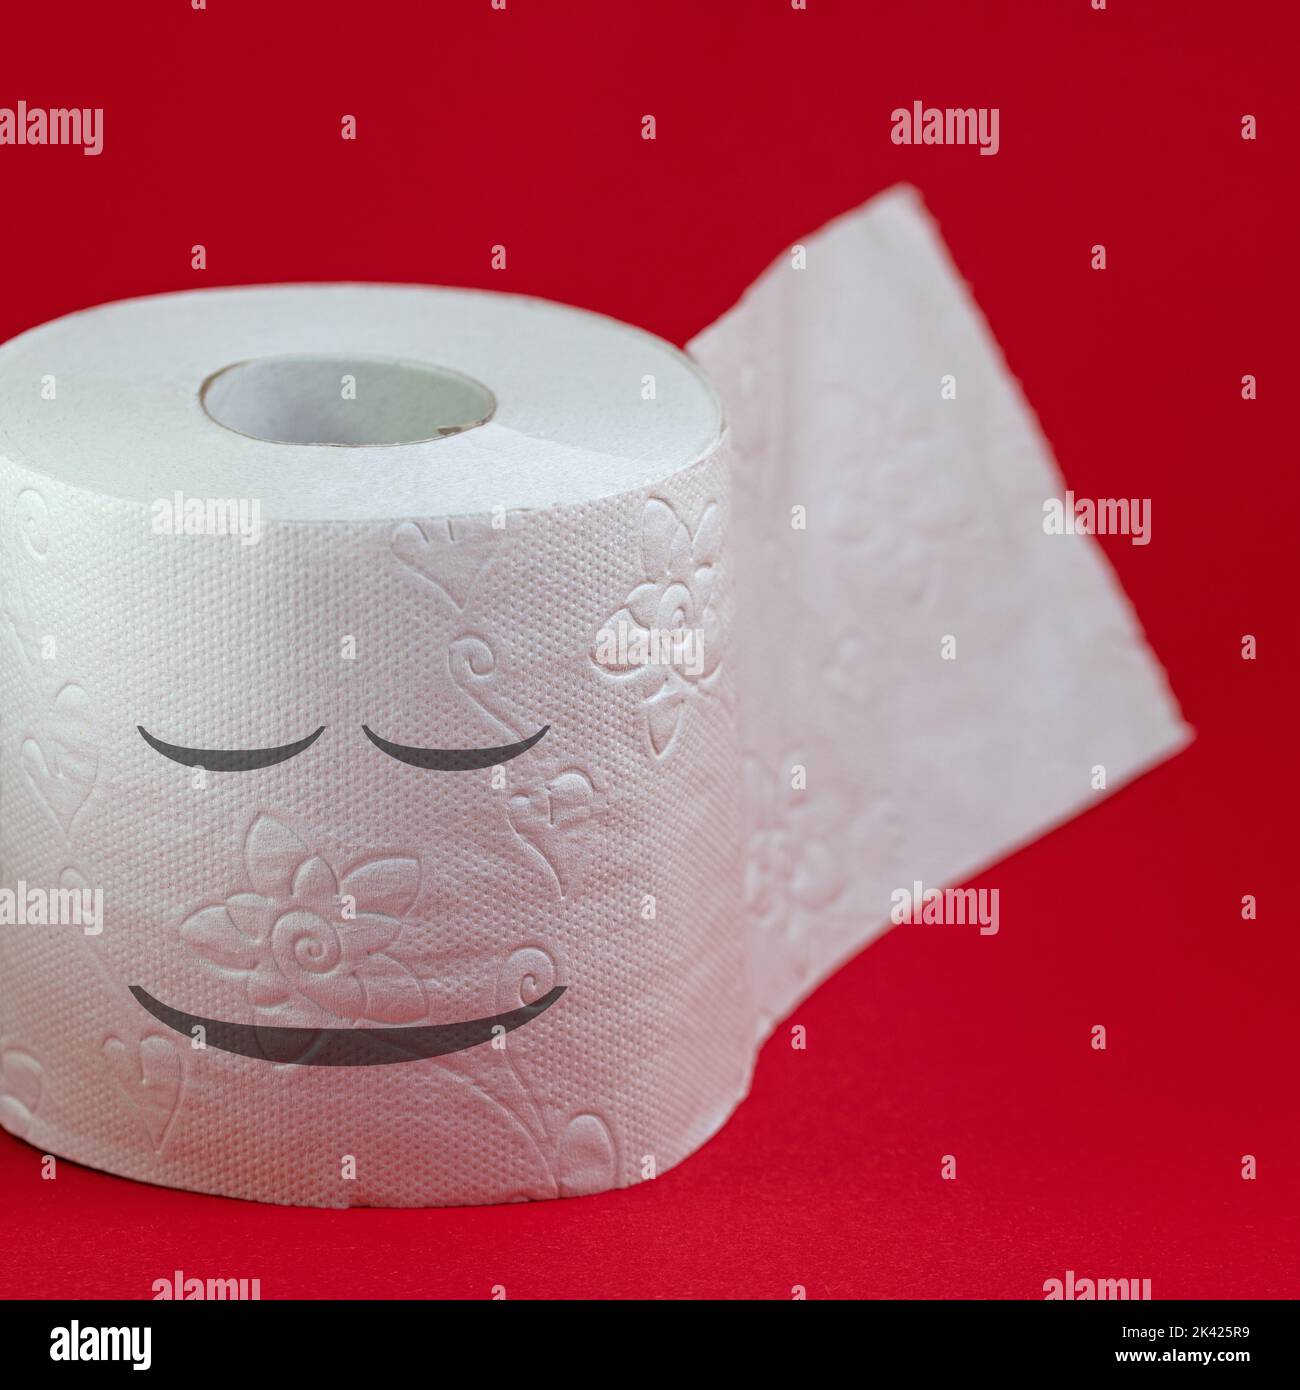 Toilet paper with dreamy face against a red background Stock Photo